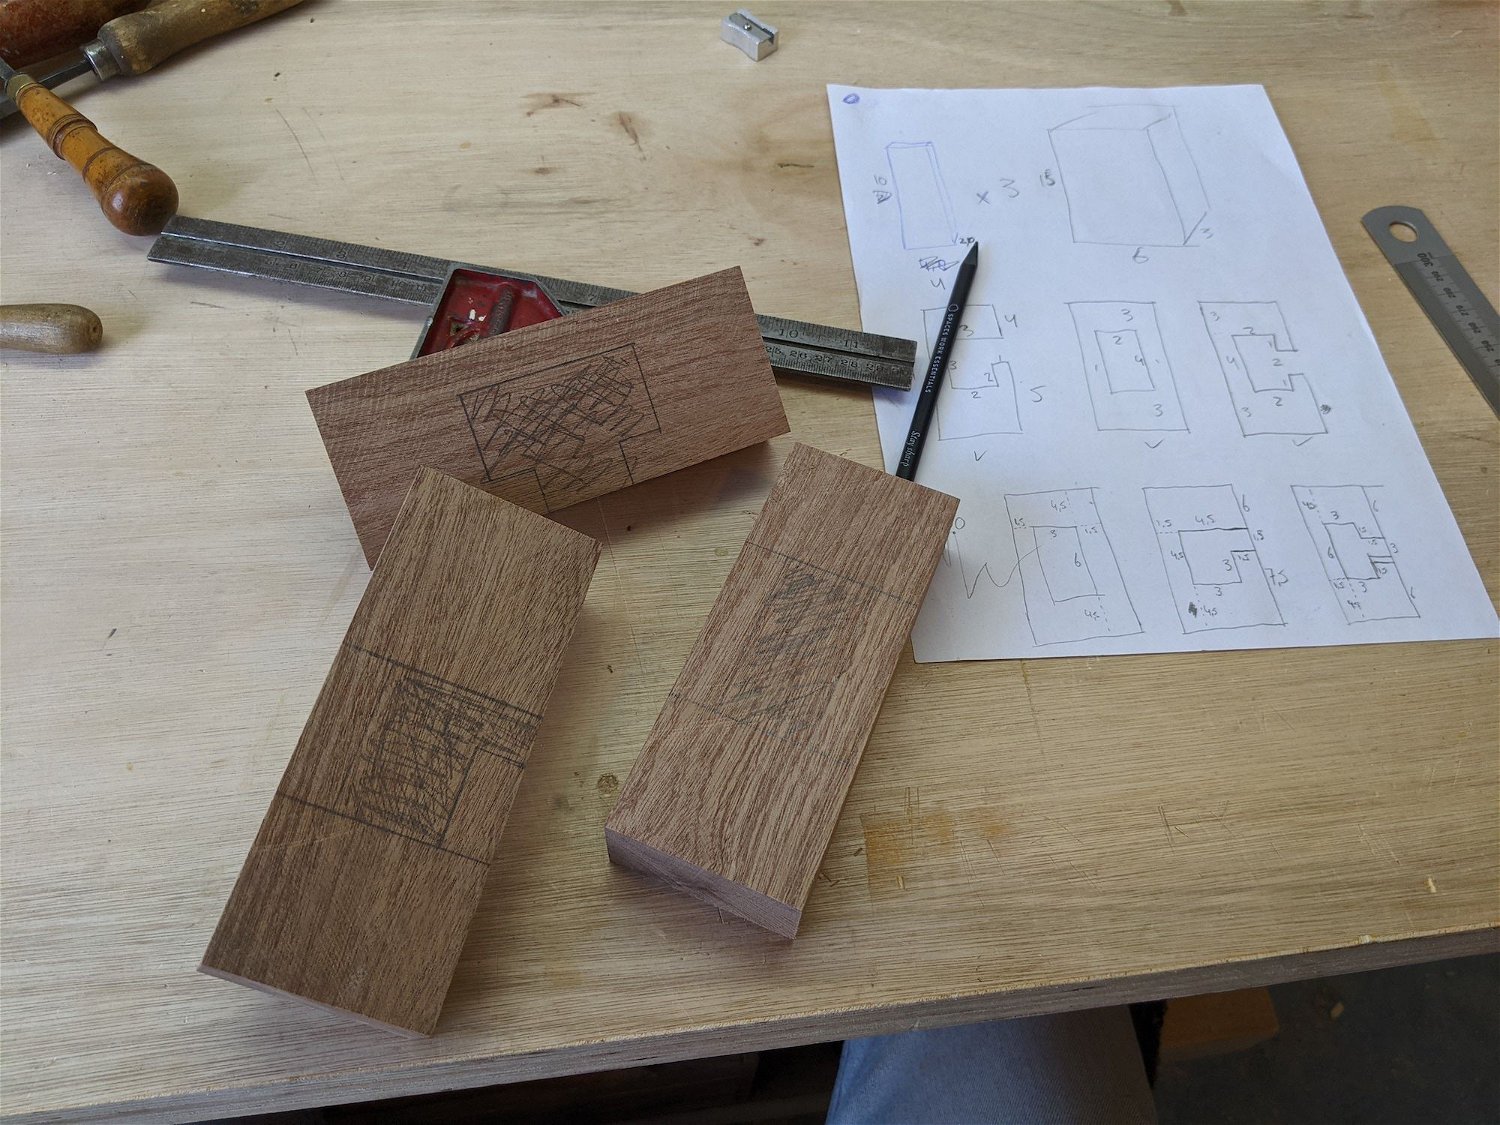 Drew out all the dimensions on paper and then on the pieces themselves and started chiseling away.